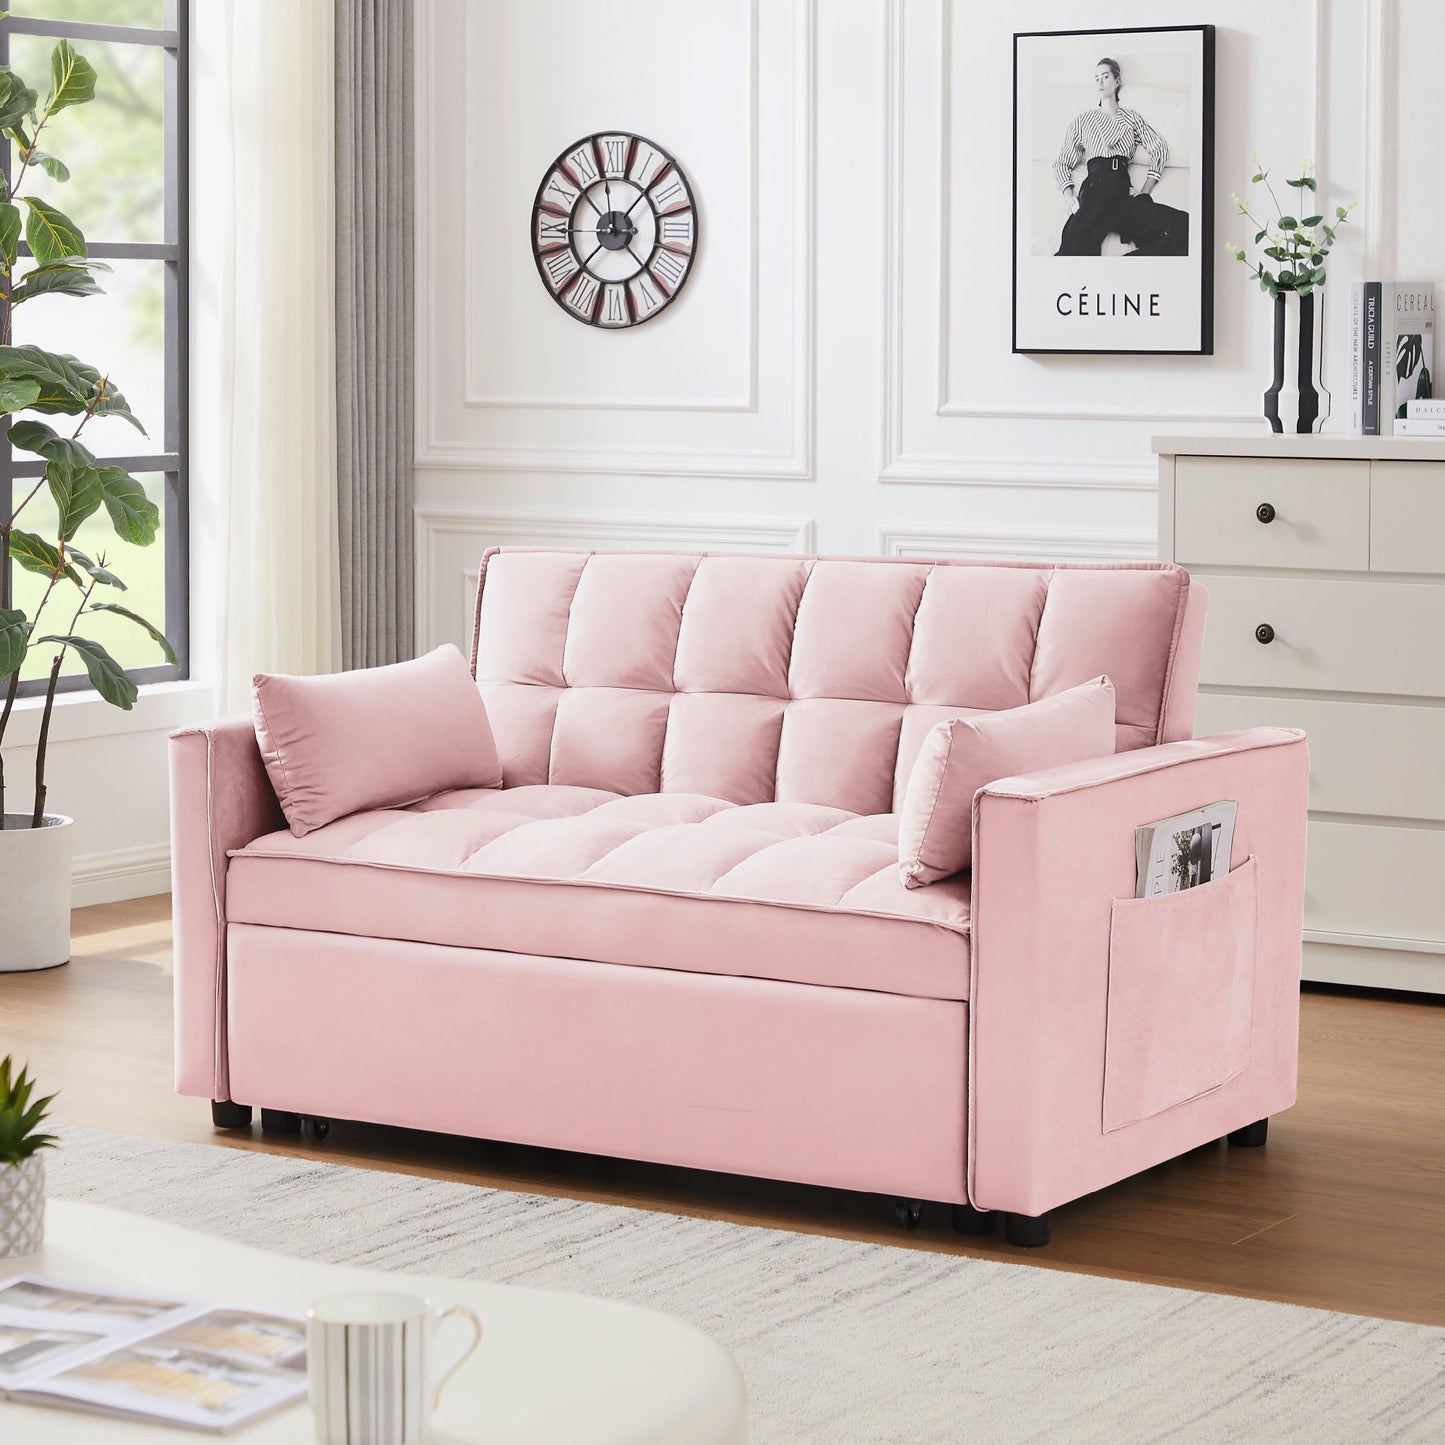 "Modern pink velvet loveseat futon sofa couch with pullout bed, reclining backrest, toss pillows, and side pockets, ideal for living rooms as a 3-in-1 convertible sleeper sofa bed."